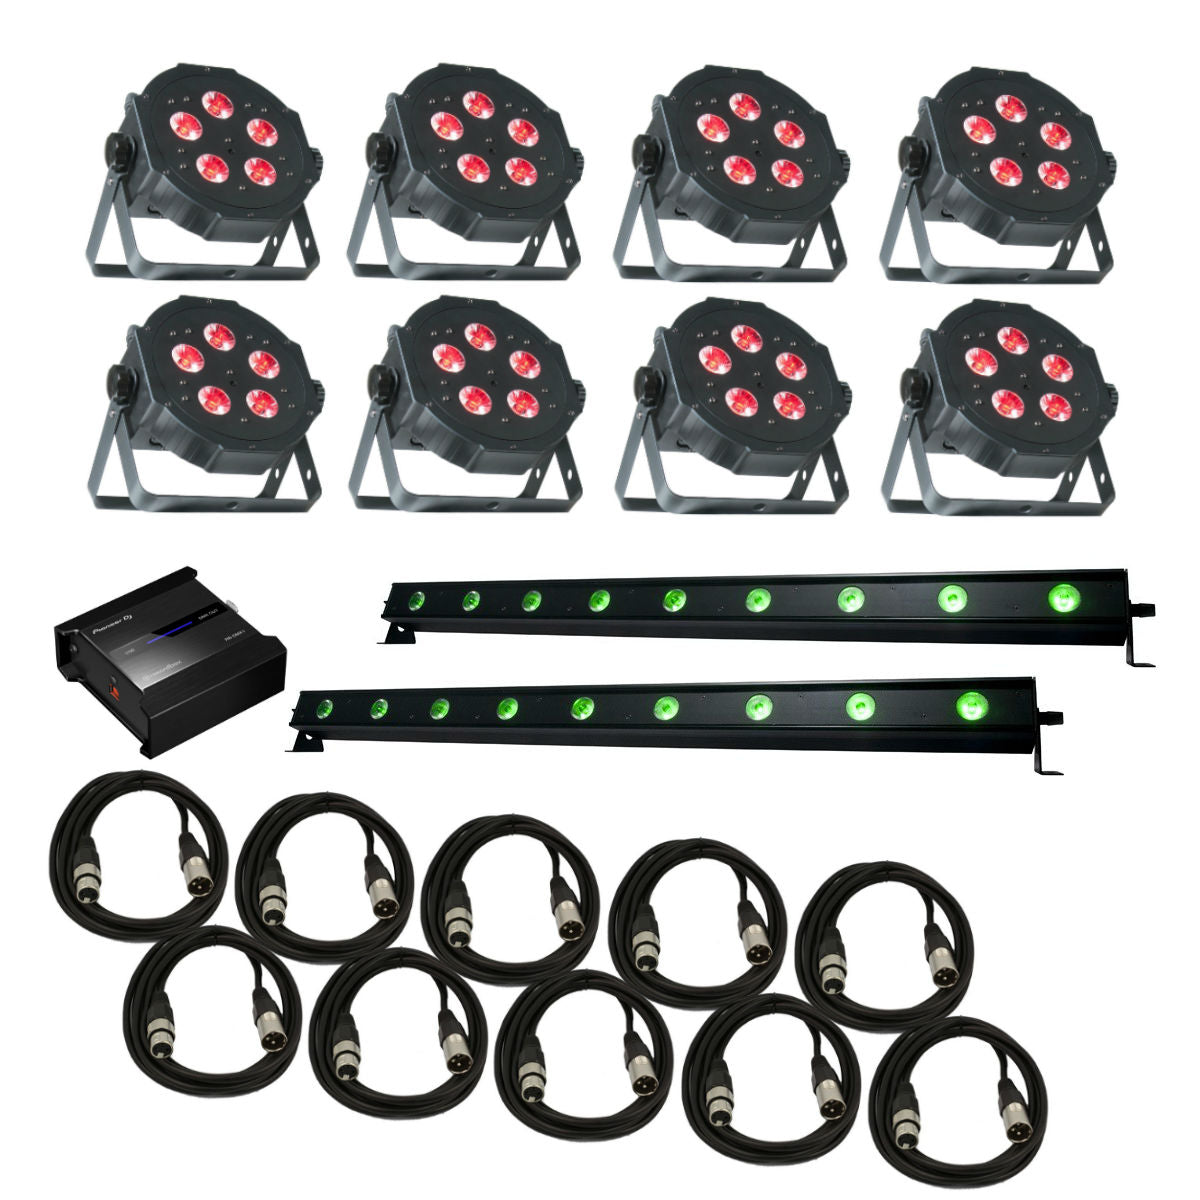 PRO MOBILE LIGHTING PACKAGE 6